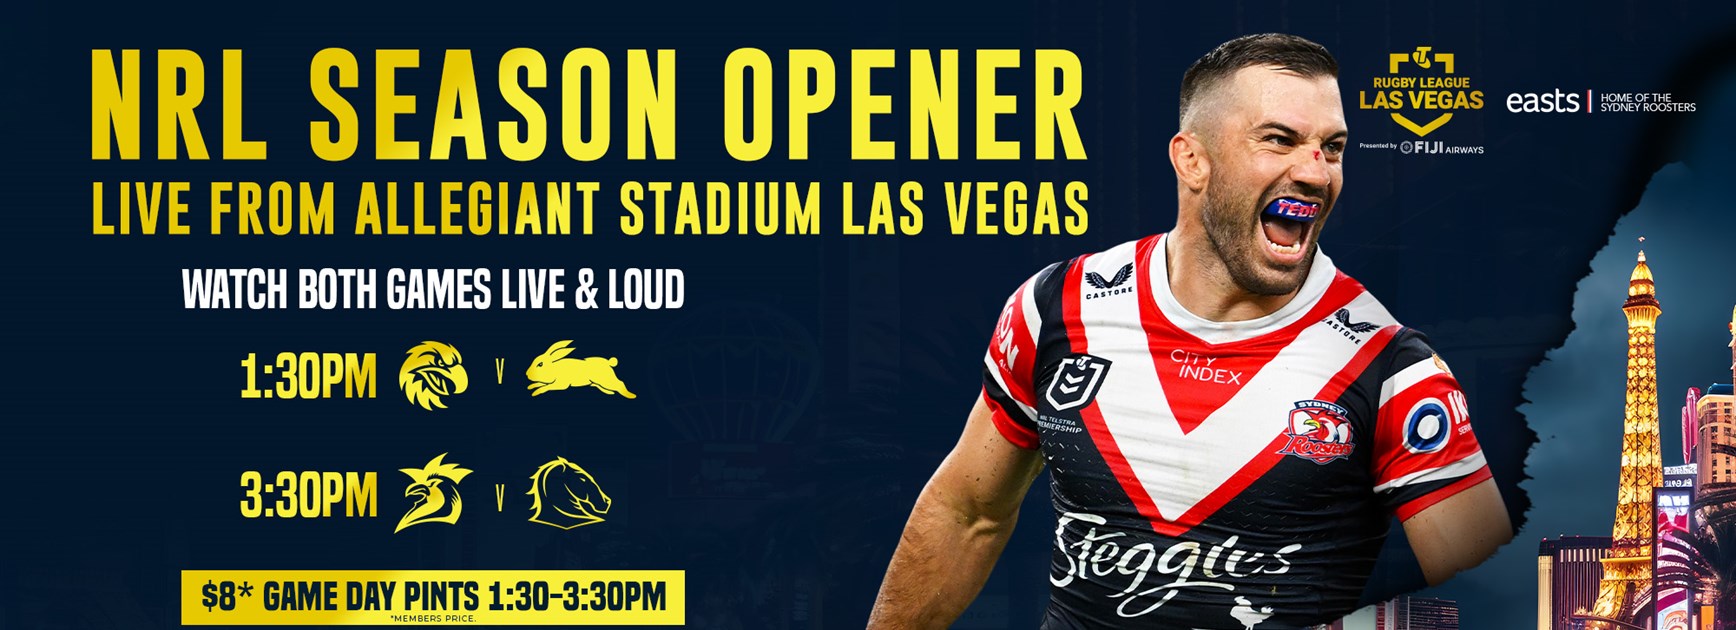 Head to Easts to Kick-Off the Season in Style!